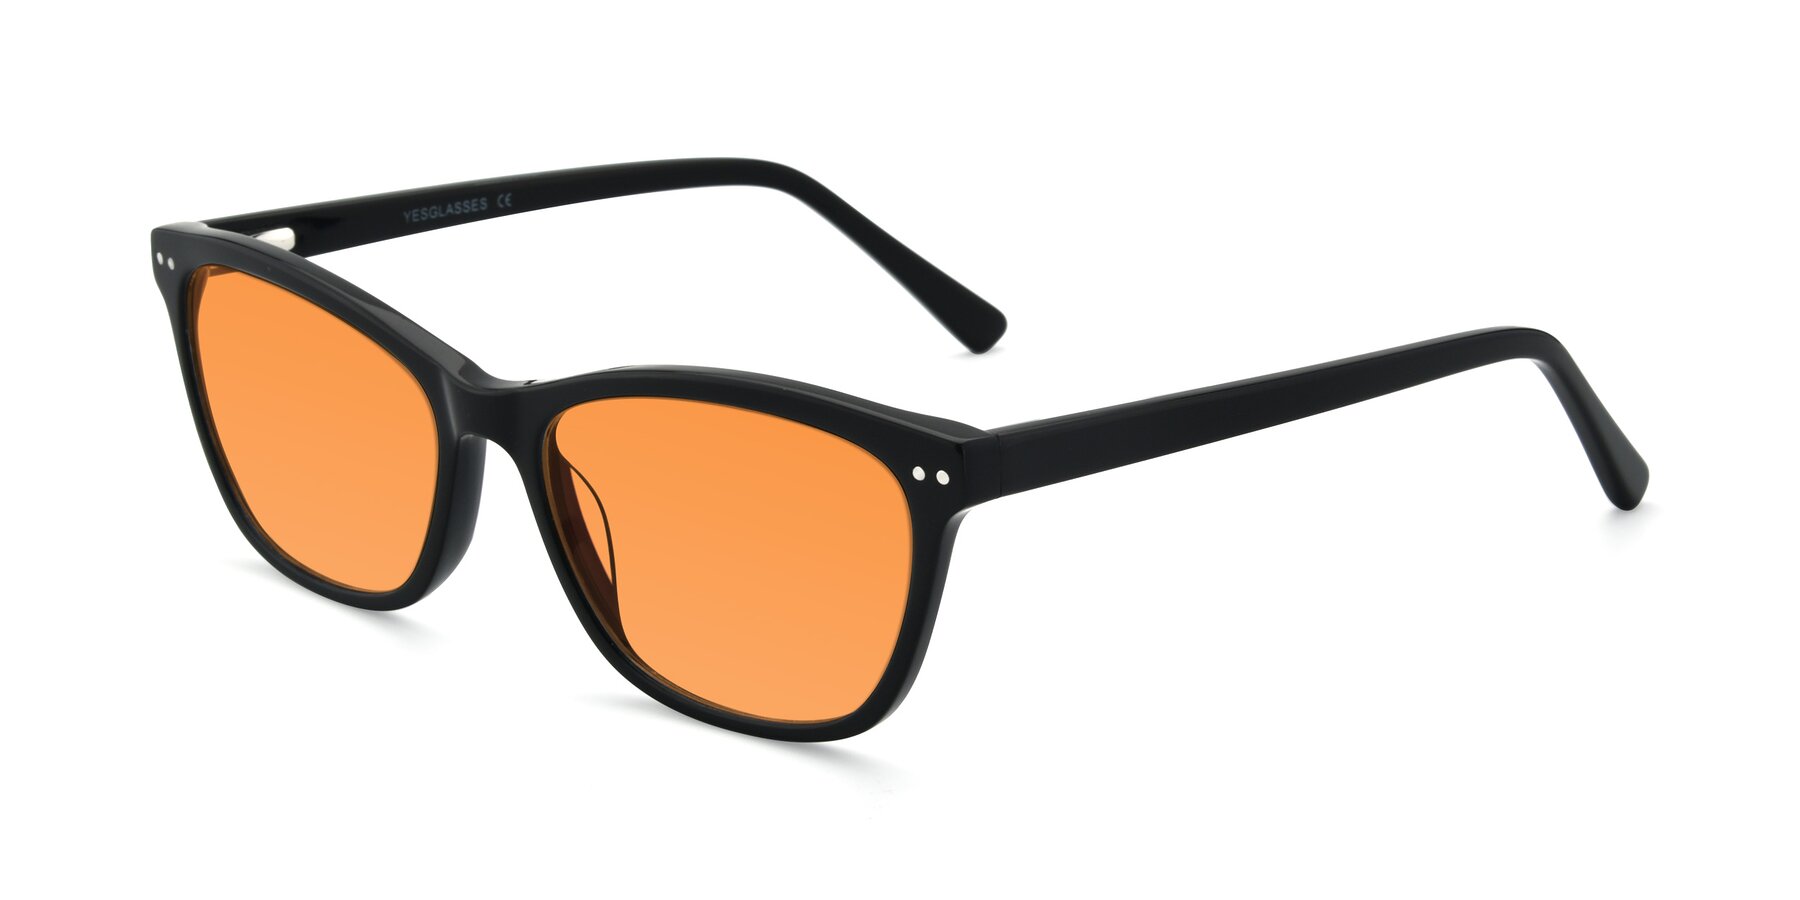 Angle of 17350 in Black with Orange Tinted Lenses